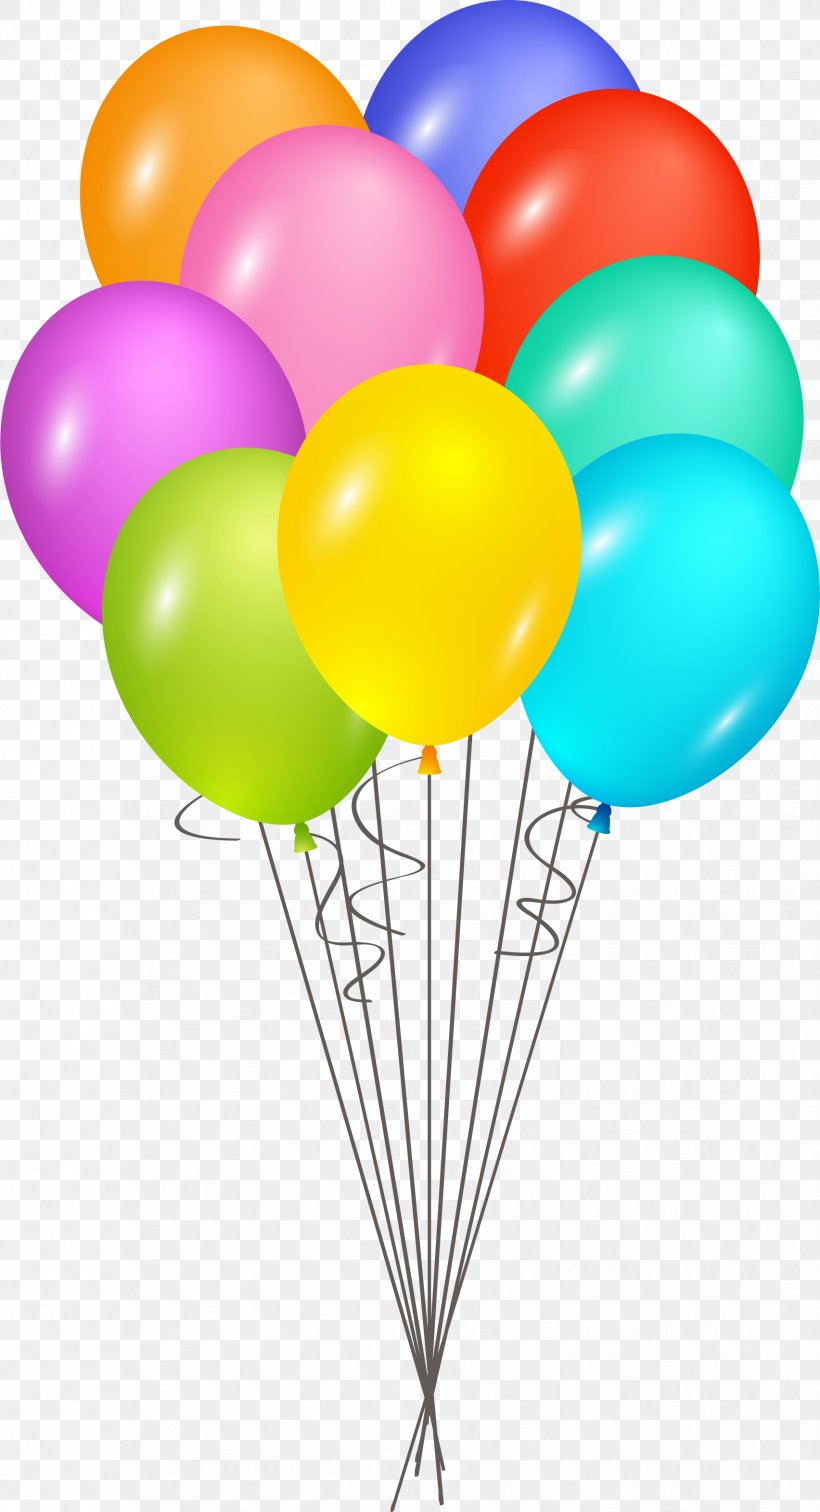 Birthday Cake Elk Island Public Schools Regional Division No. 14 Balloon Greeting Card, PNG, 1704x3144px, Birthday Cake, Anniversary, Balloon, Birthday, Cluster Ballooning Download Free